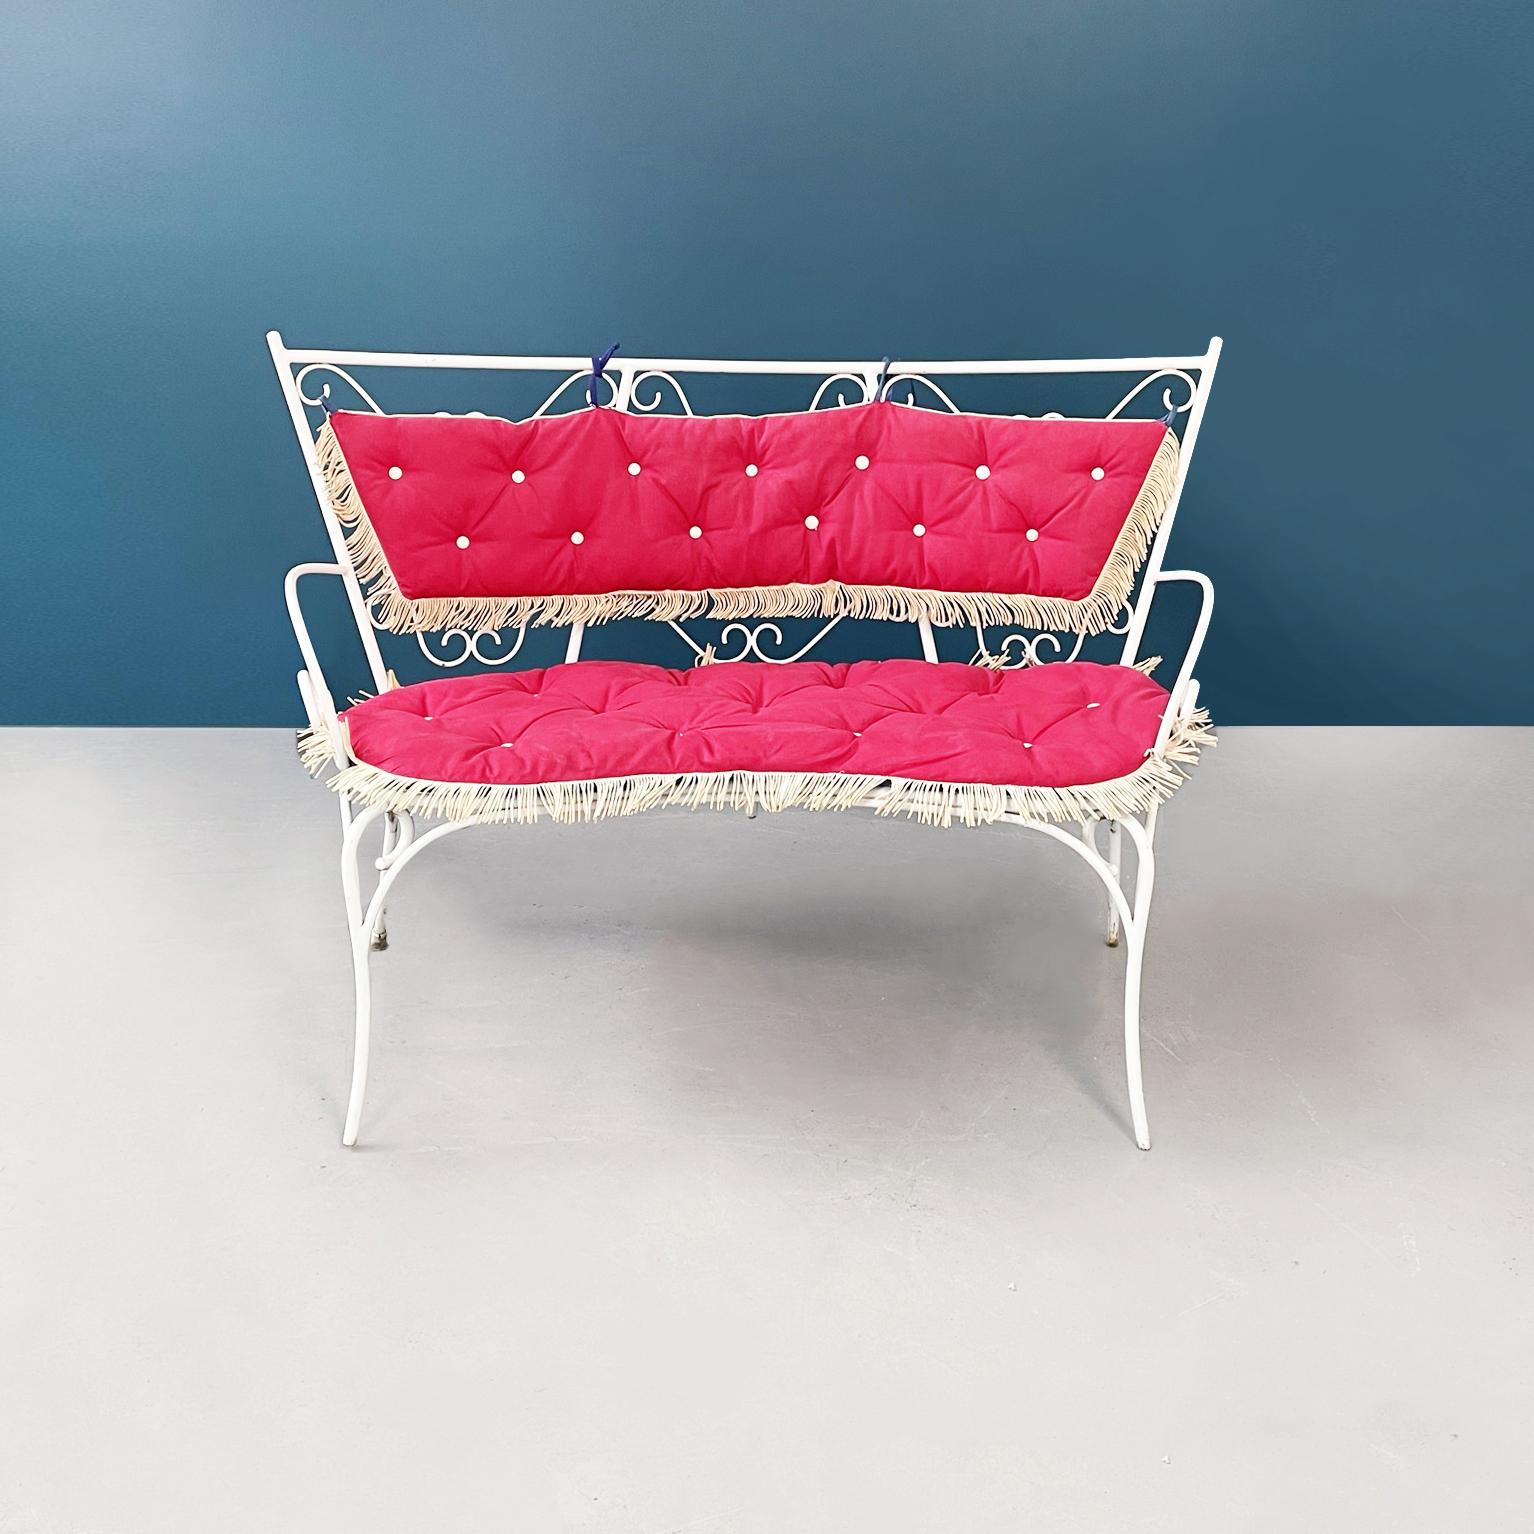 Mid-Century Modern Italian Mid-Century Garden Bench in White Wrought Iron and Fabric, 1960s For Sale